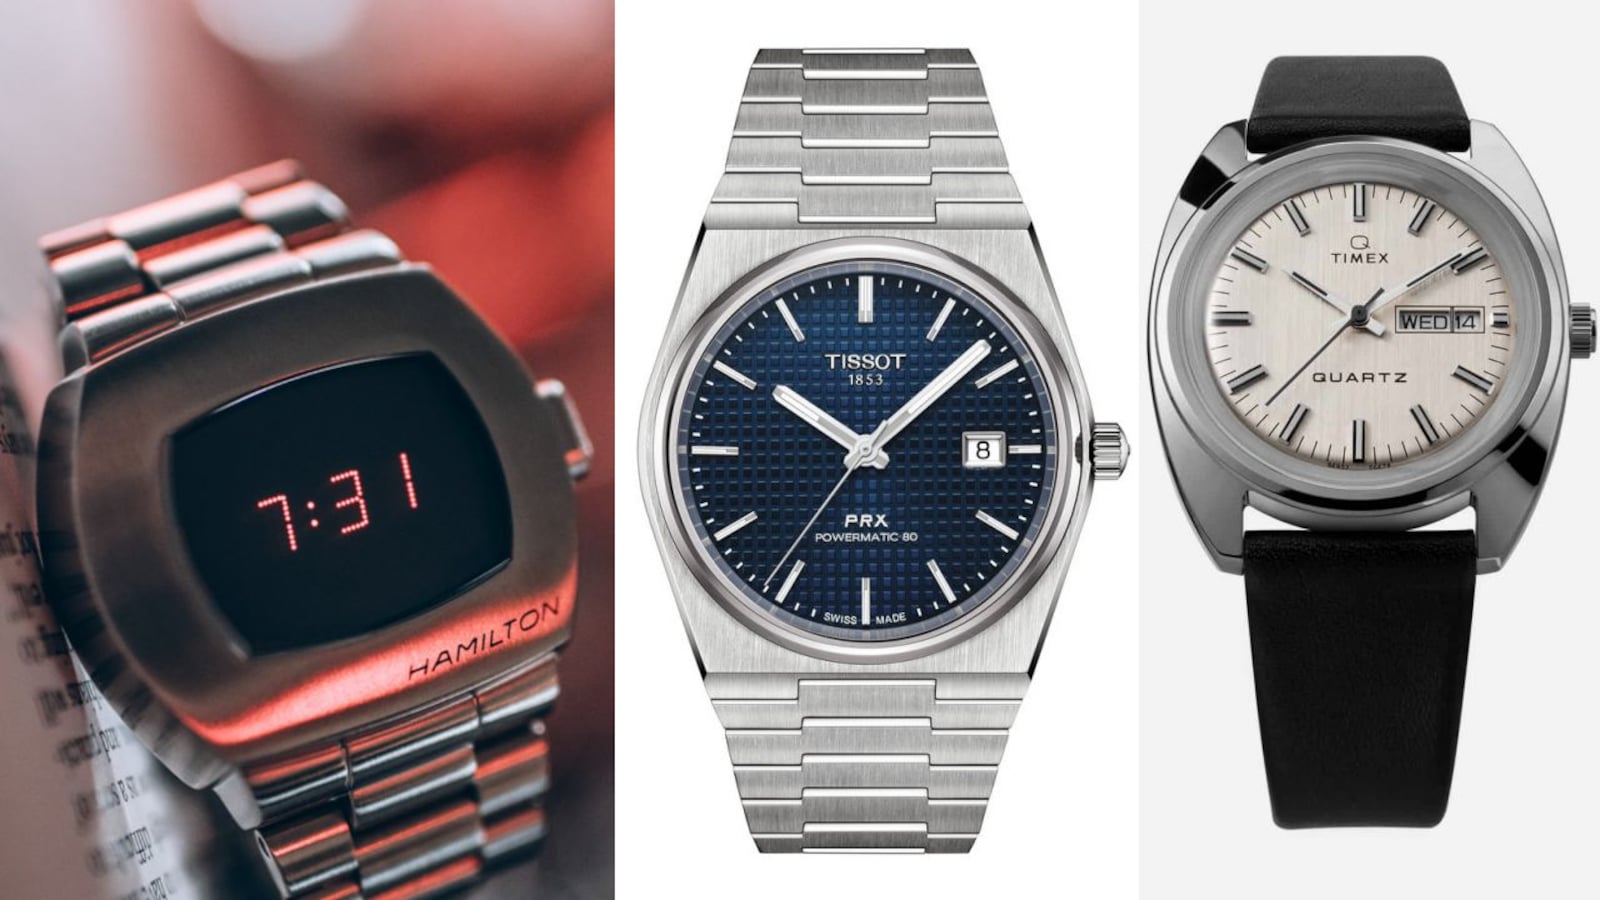 From Tissot to Timex, here are four affordable watches inspired by the '70s